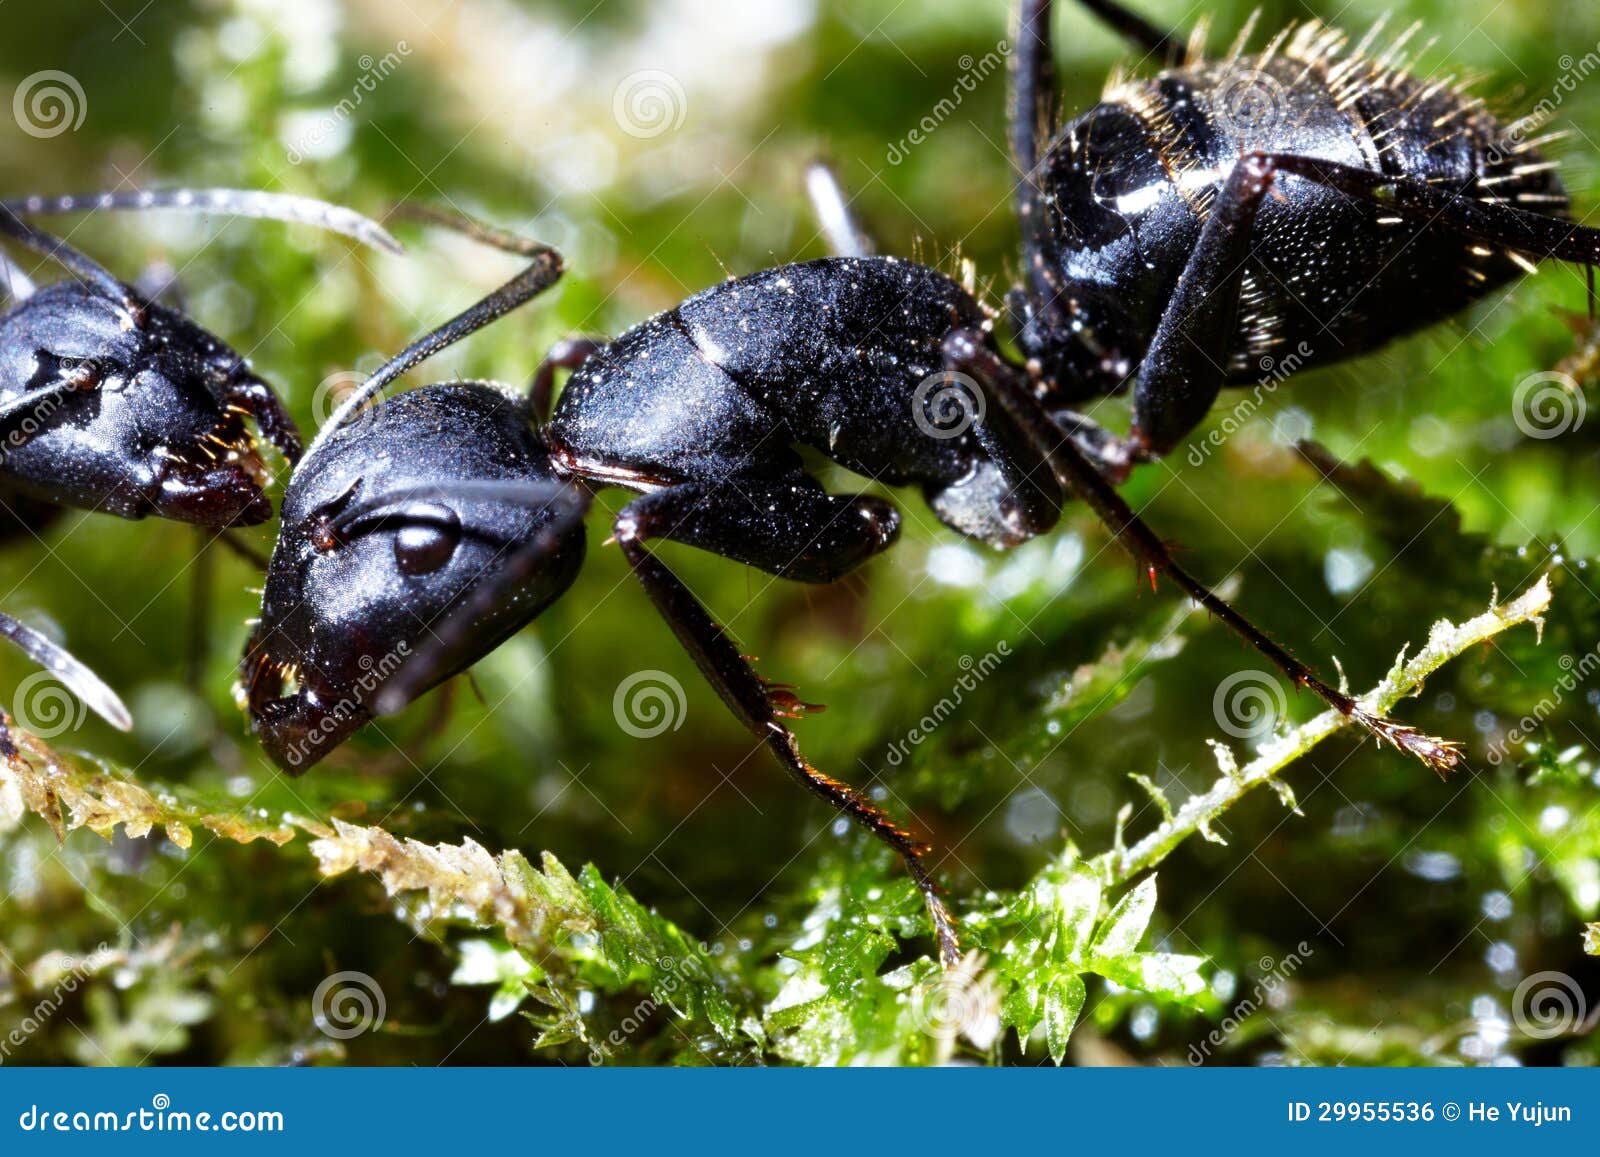 Two Ants Conspiracy On Grass Stock Photo - Image of ...